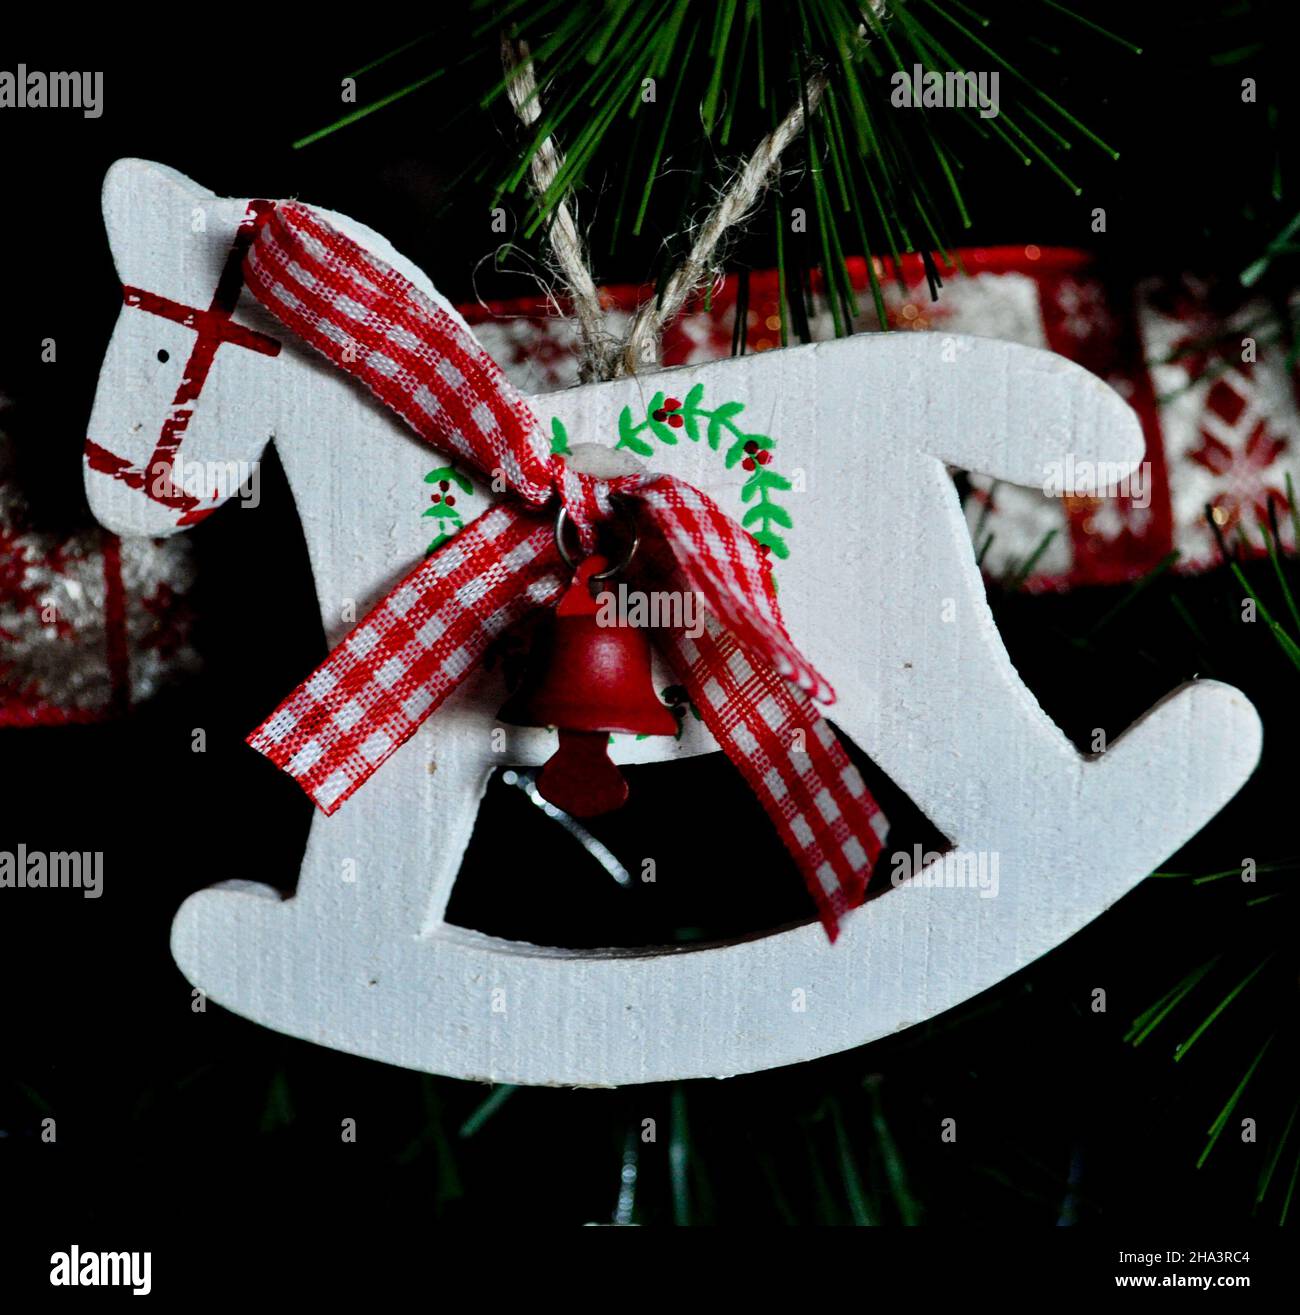 A simple wooden rocking horse Christmas Tree decoration Stock Photo